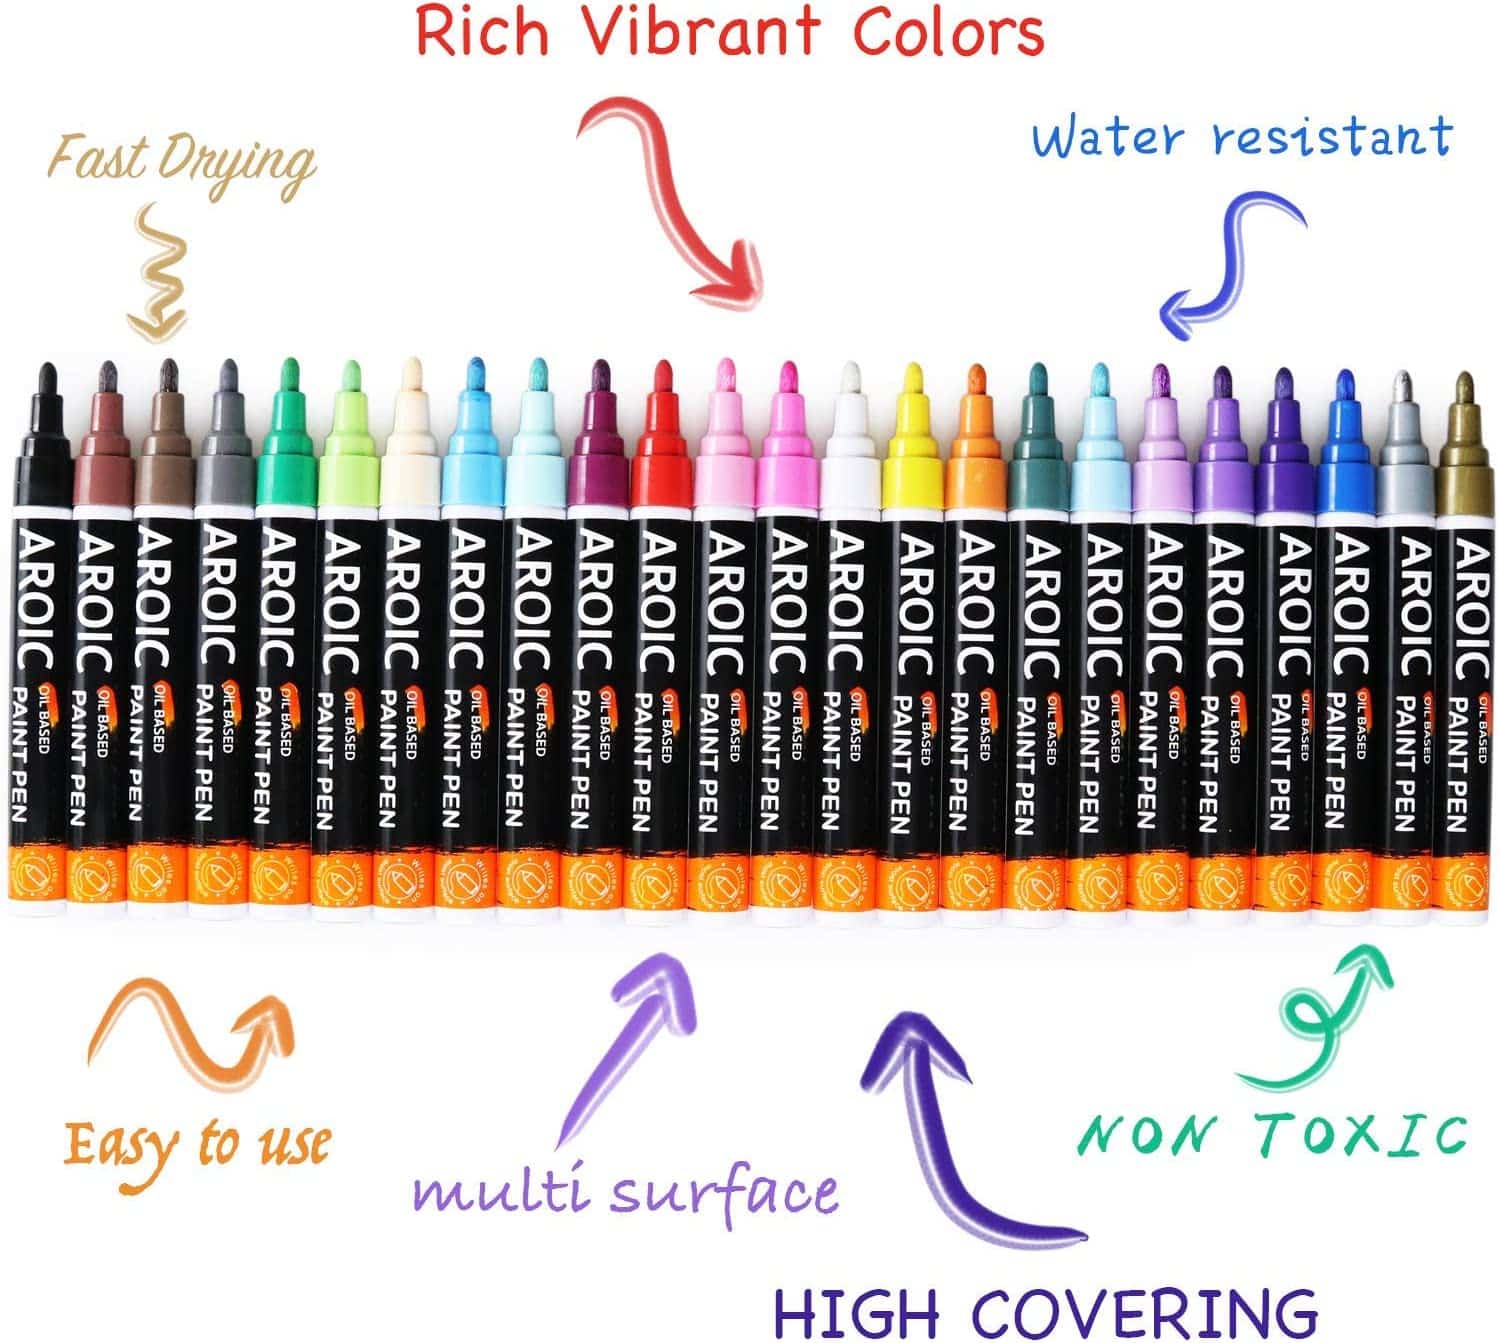 Aroic 36 Pack Paint Pens for Rock Painting features